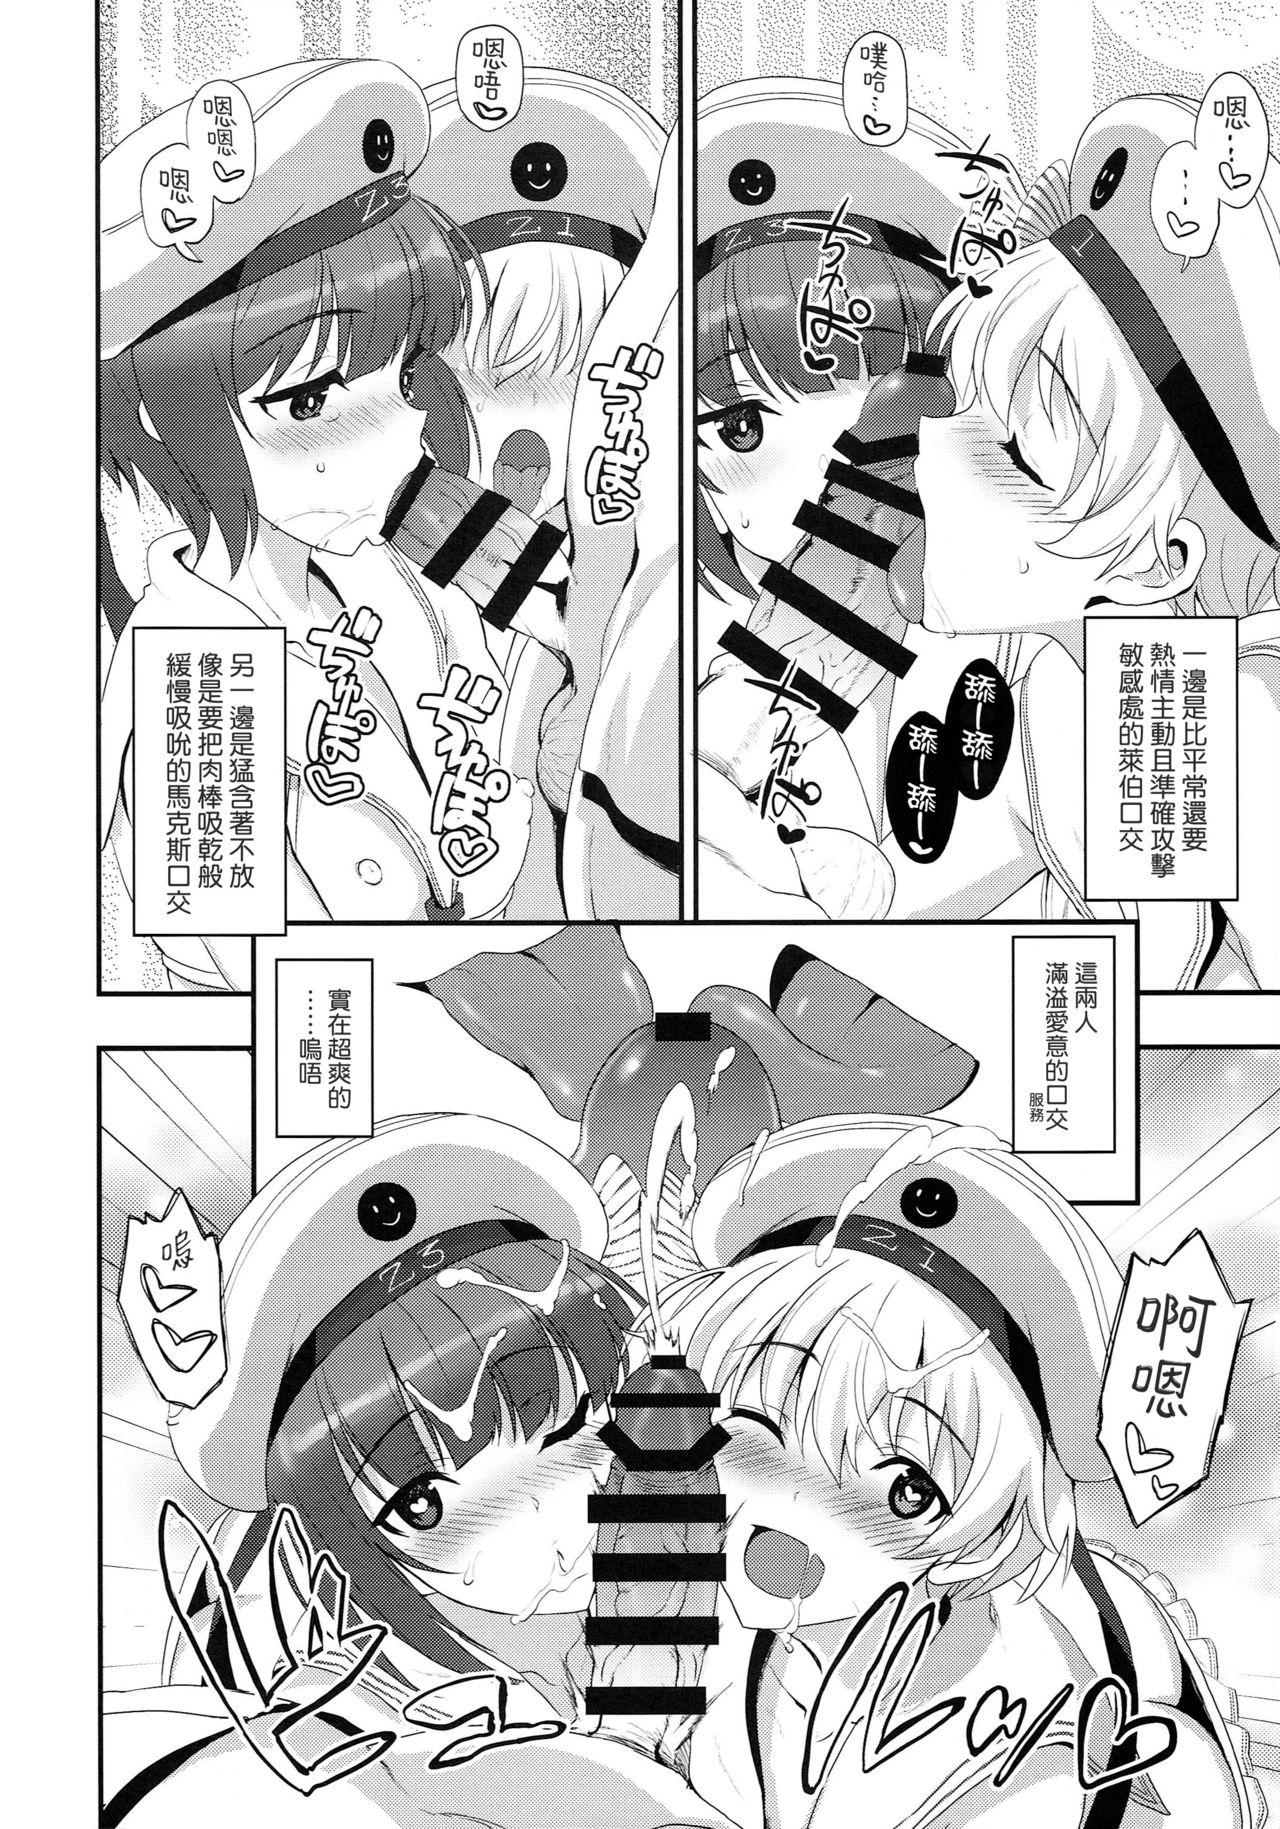 Amature Porn Apfelschorle - Kantai collection Leaked - Page 8